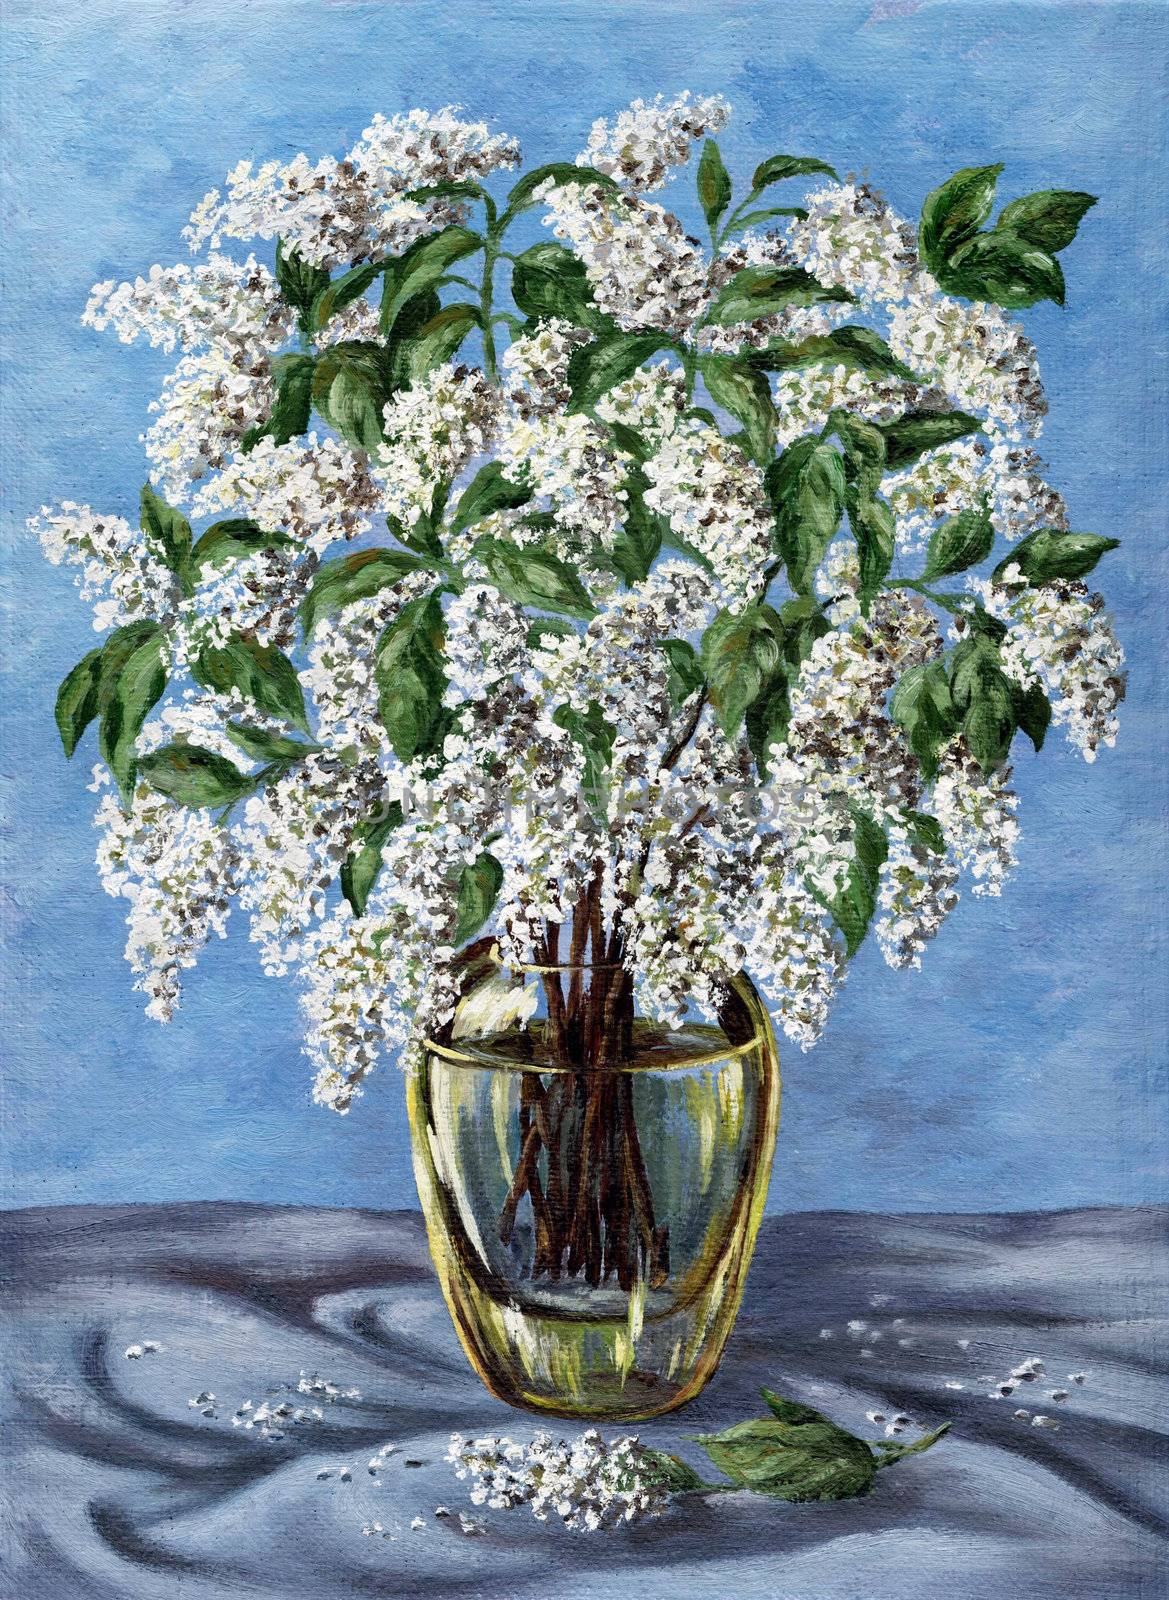 Picture oil paints on a canvas: a bouquet of bird cherry in a glass vase